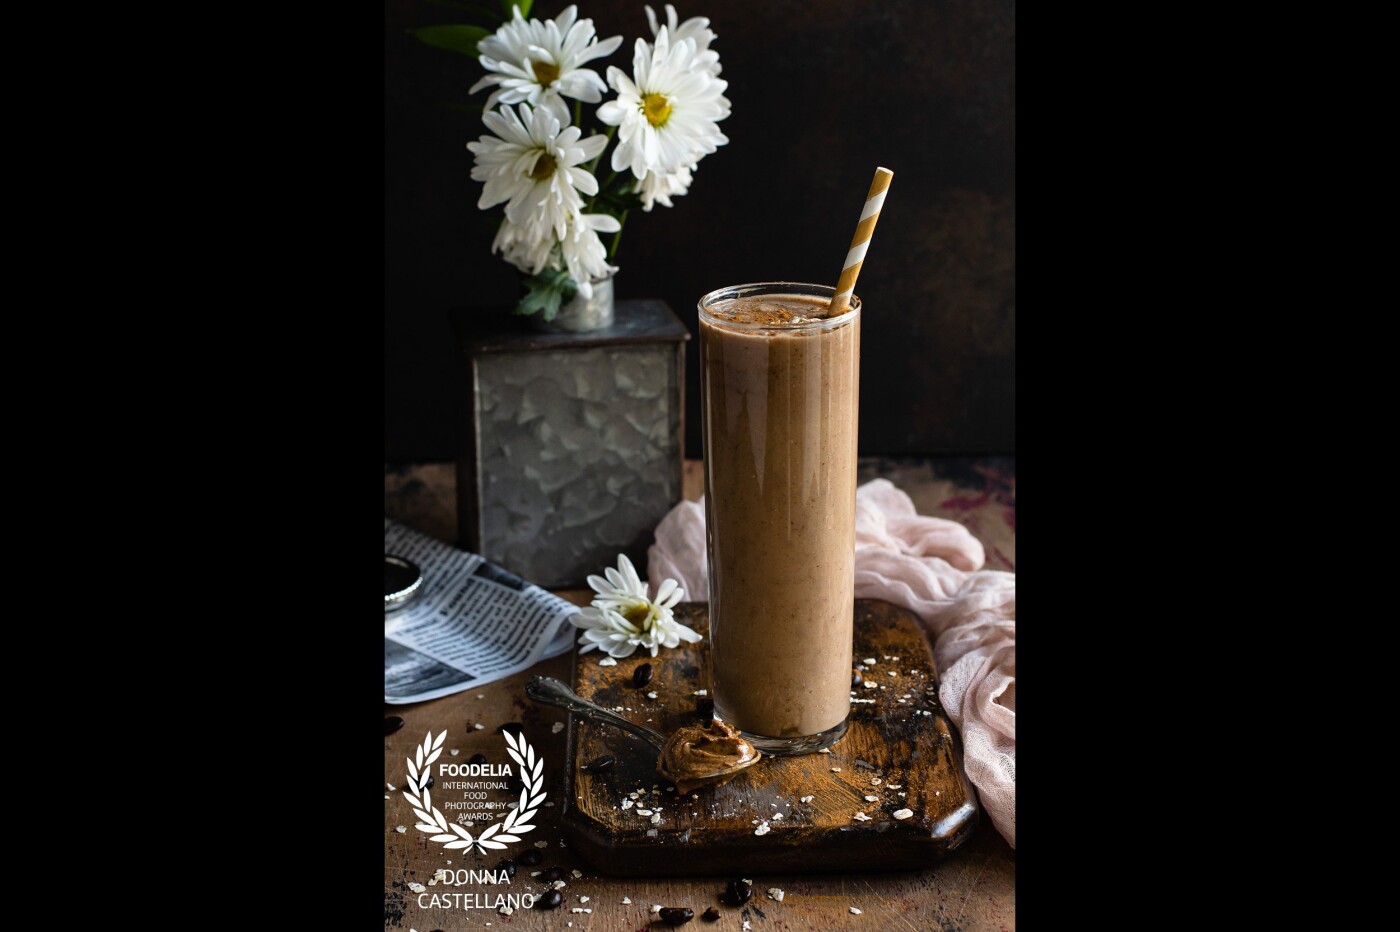 A healthier breakfast smoothie made with vanilla cinnamon coffee that will make it a lot easier to get out of bed in the morning!